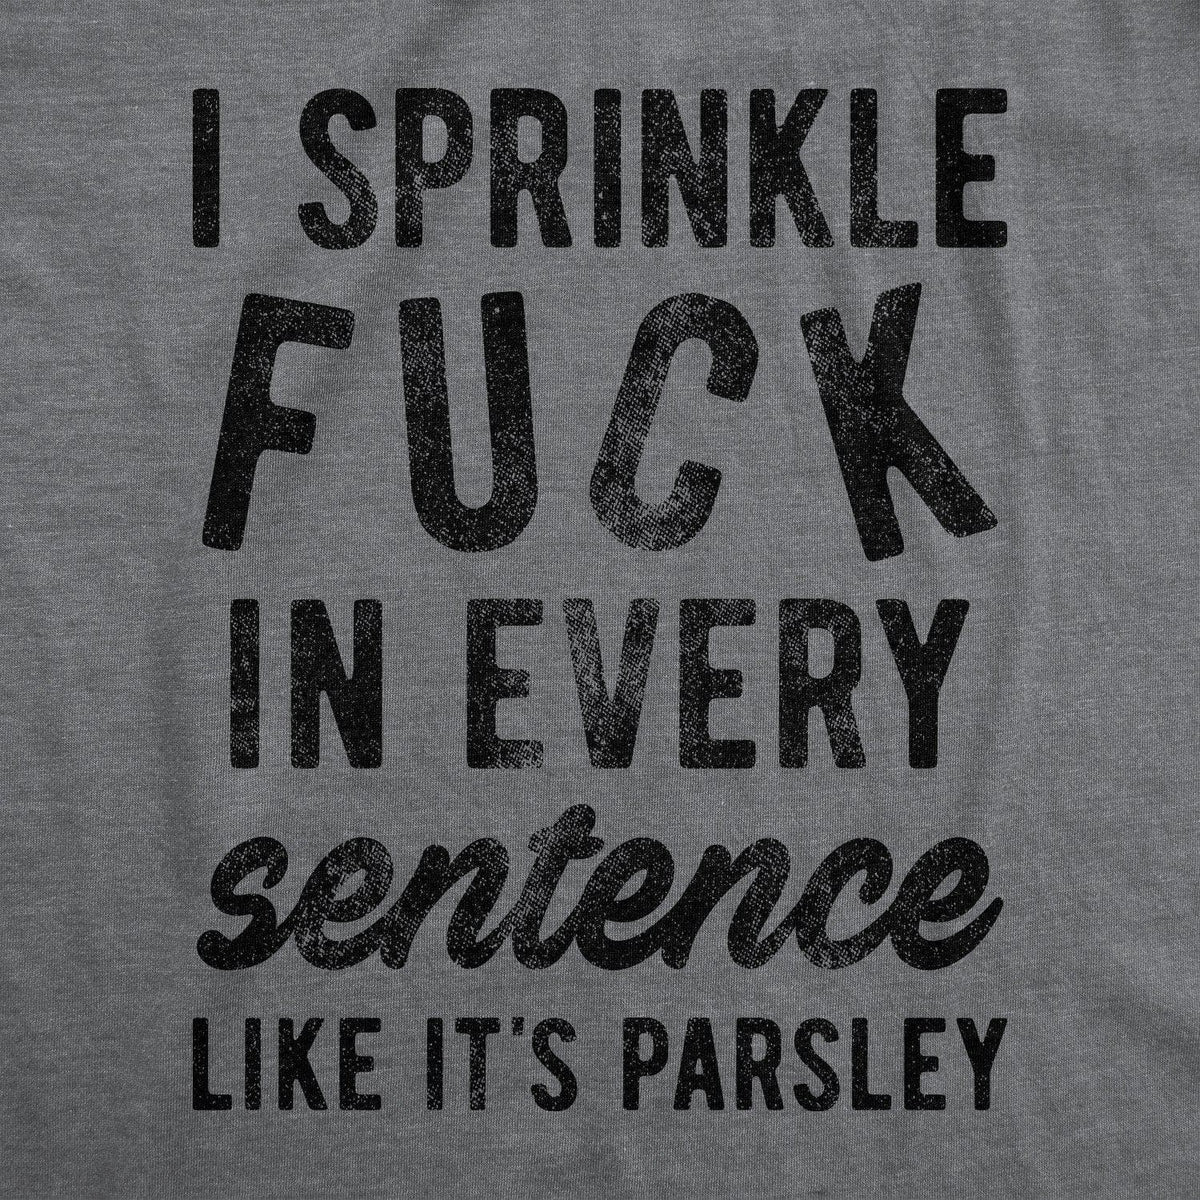 I Sprinkle Fuck In Every Sentence Men&#39;s Tshirt - Crazy Dog T-Shirts